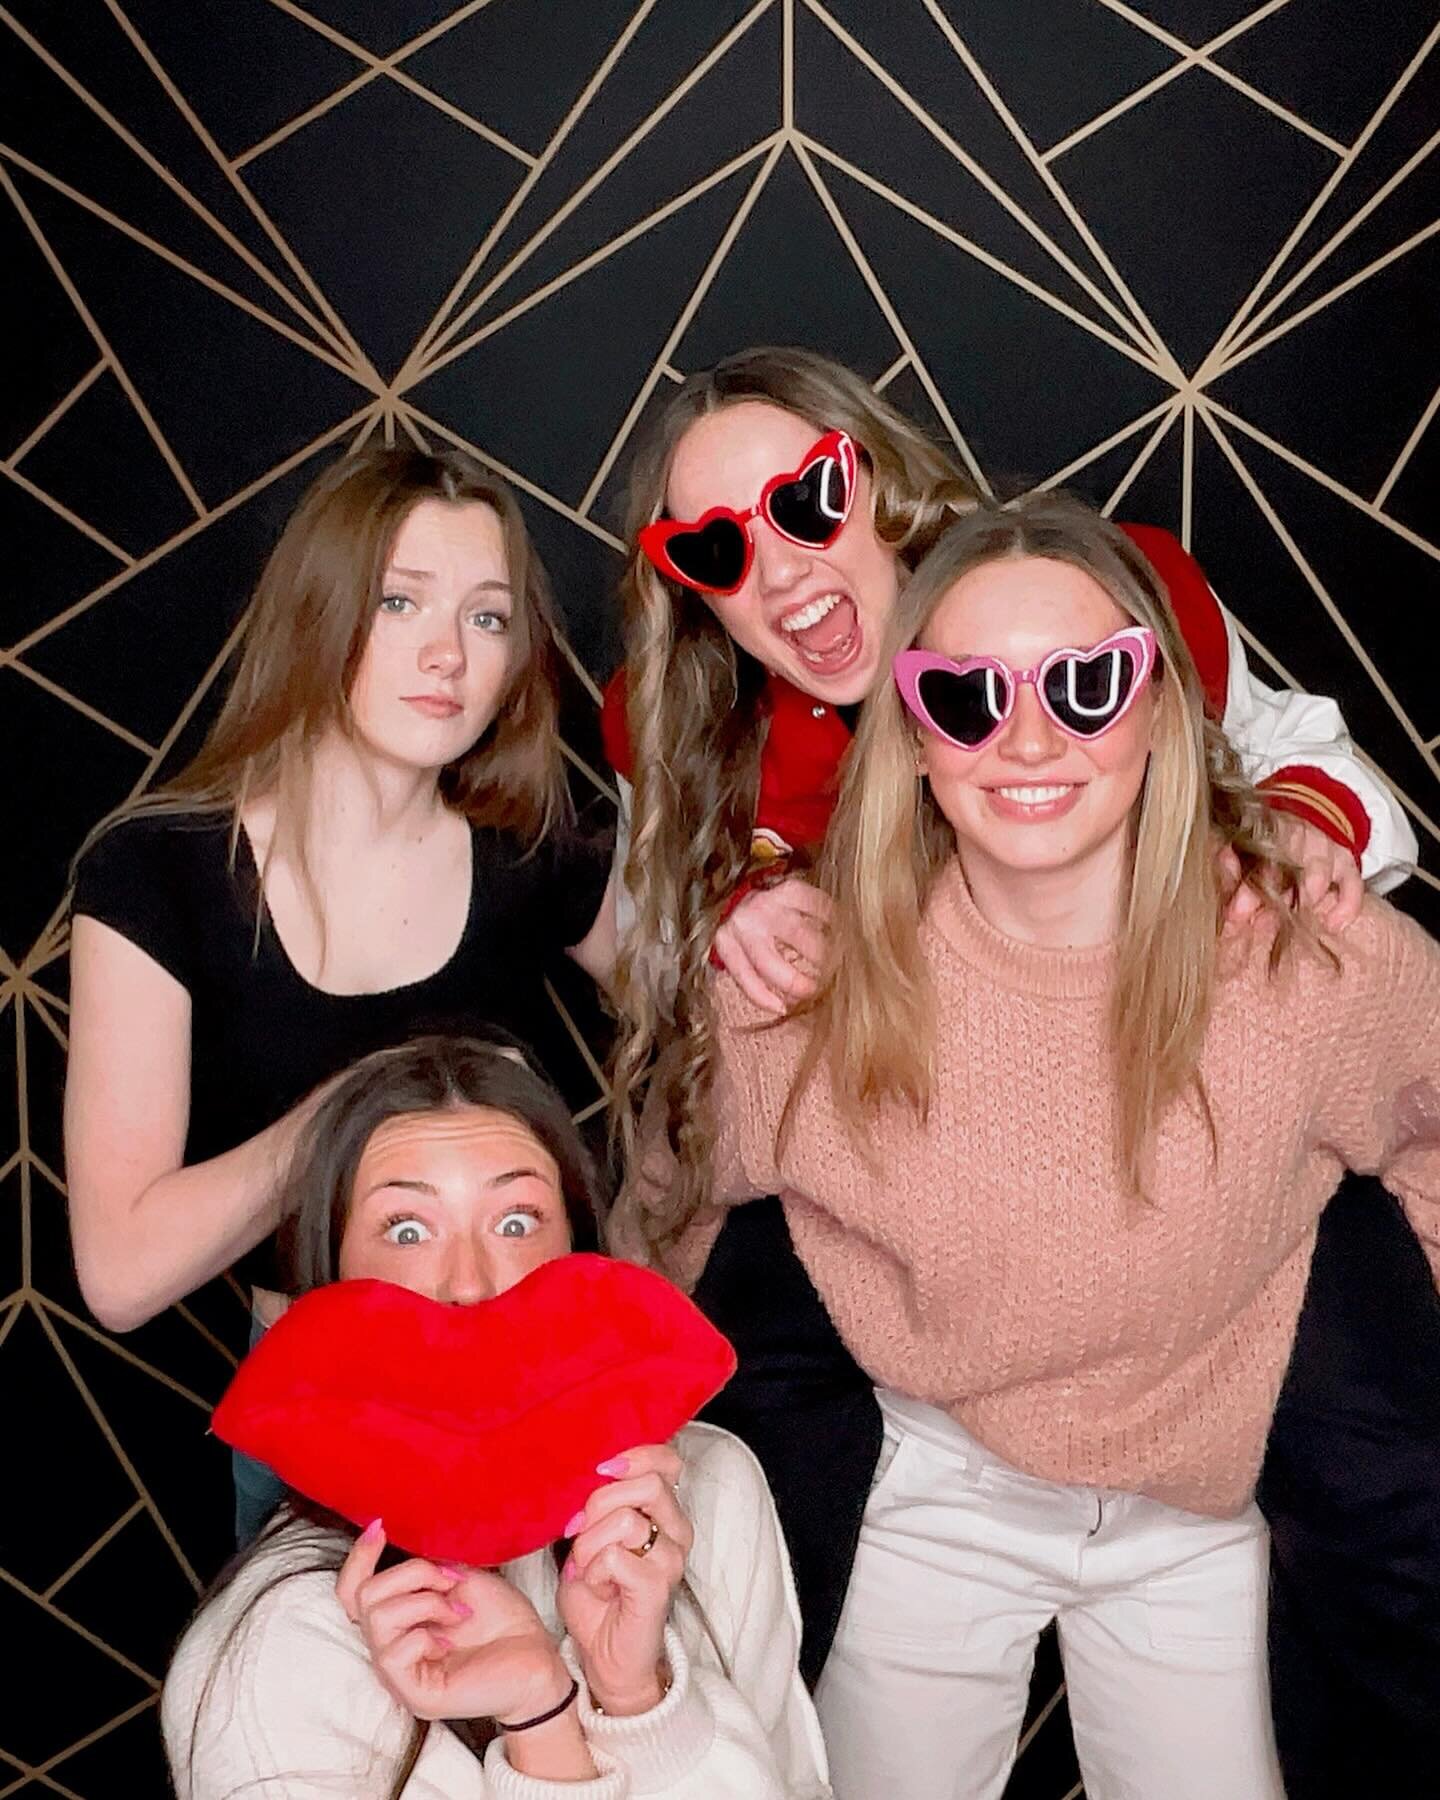 The Future is Female 🙌✨🏀 We are honored to be part of celebrating these young women&rsquo;s achievements and capturing these precious memories with their supportive families 🖤 @newport_gbb #womensupportingwomen #womenshistorymonth #photobooth #pho